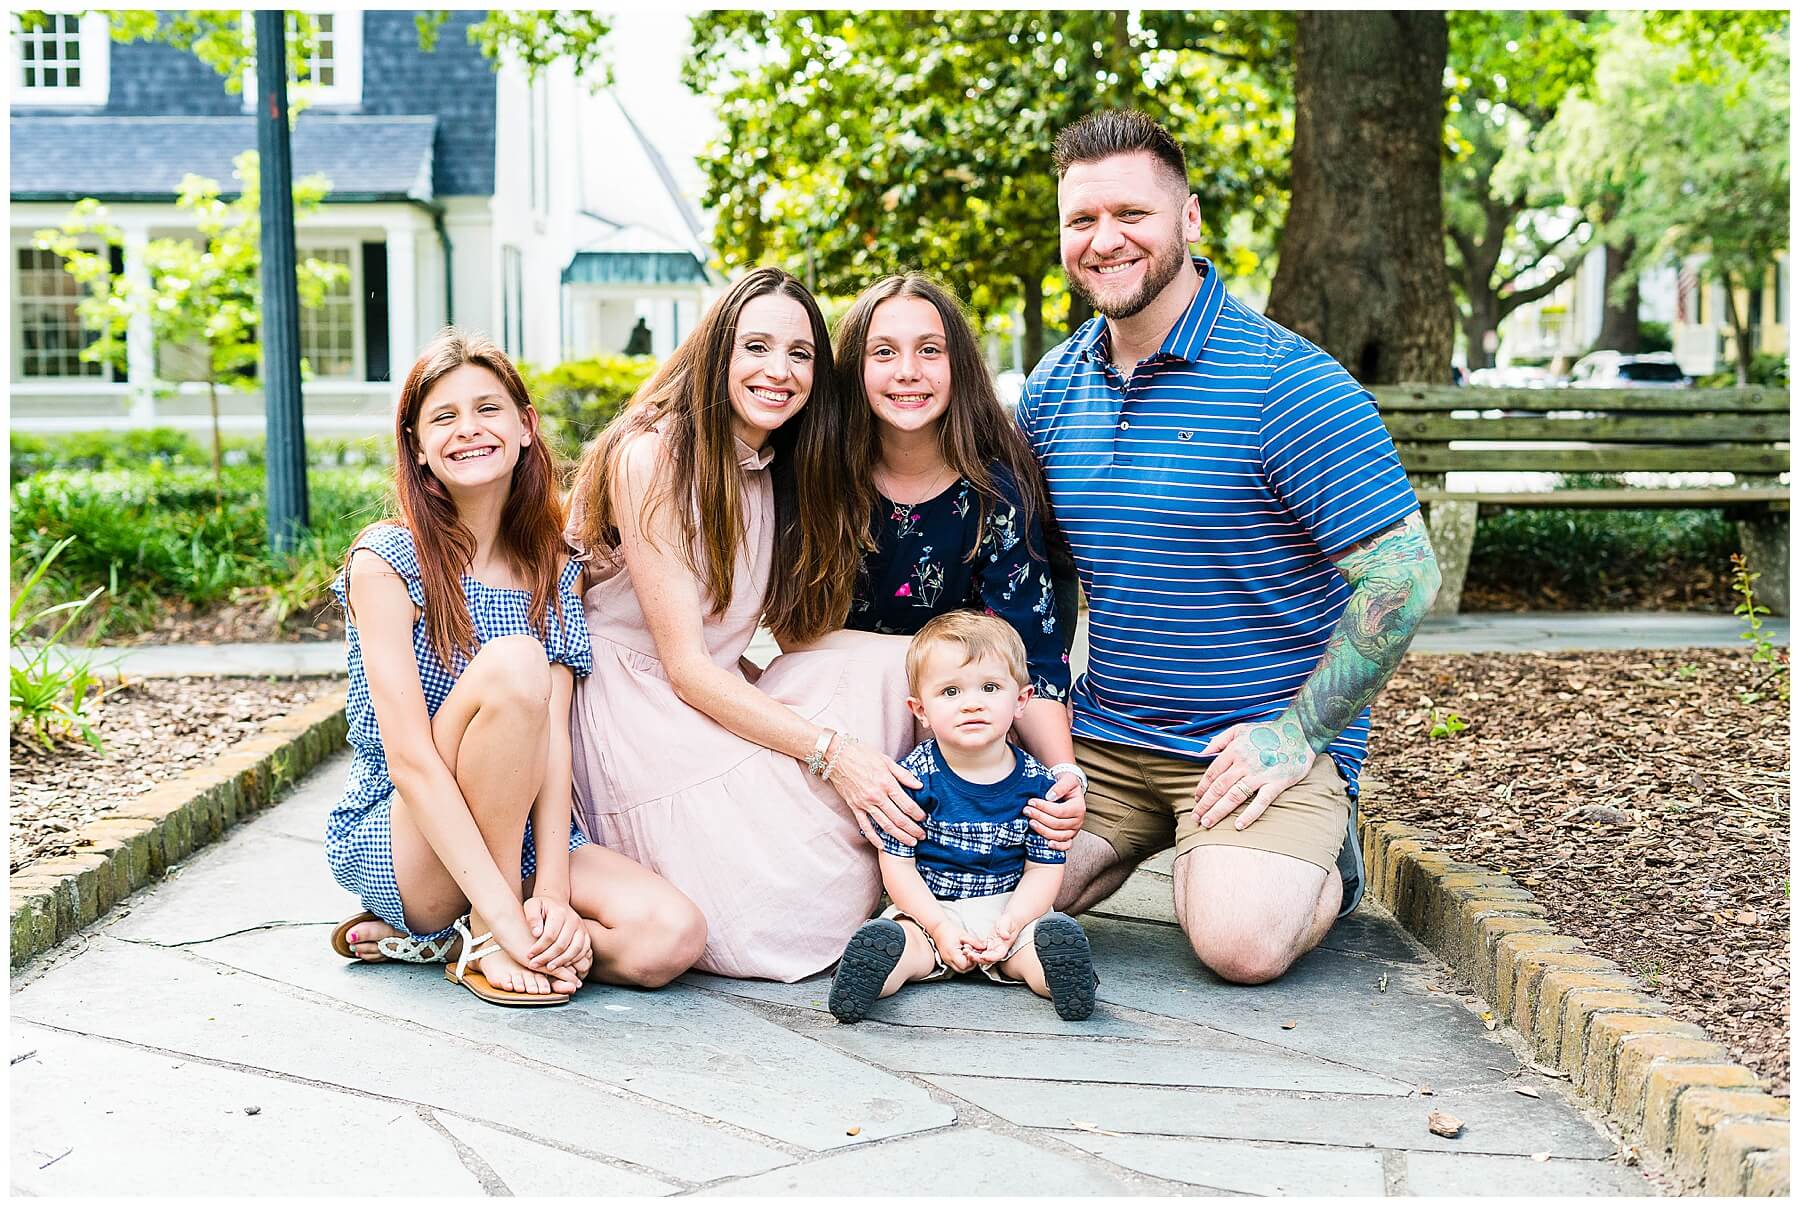 family of 5 equating around a toddler for a family photo in downtown savannah Georgia